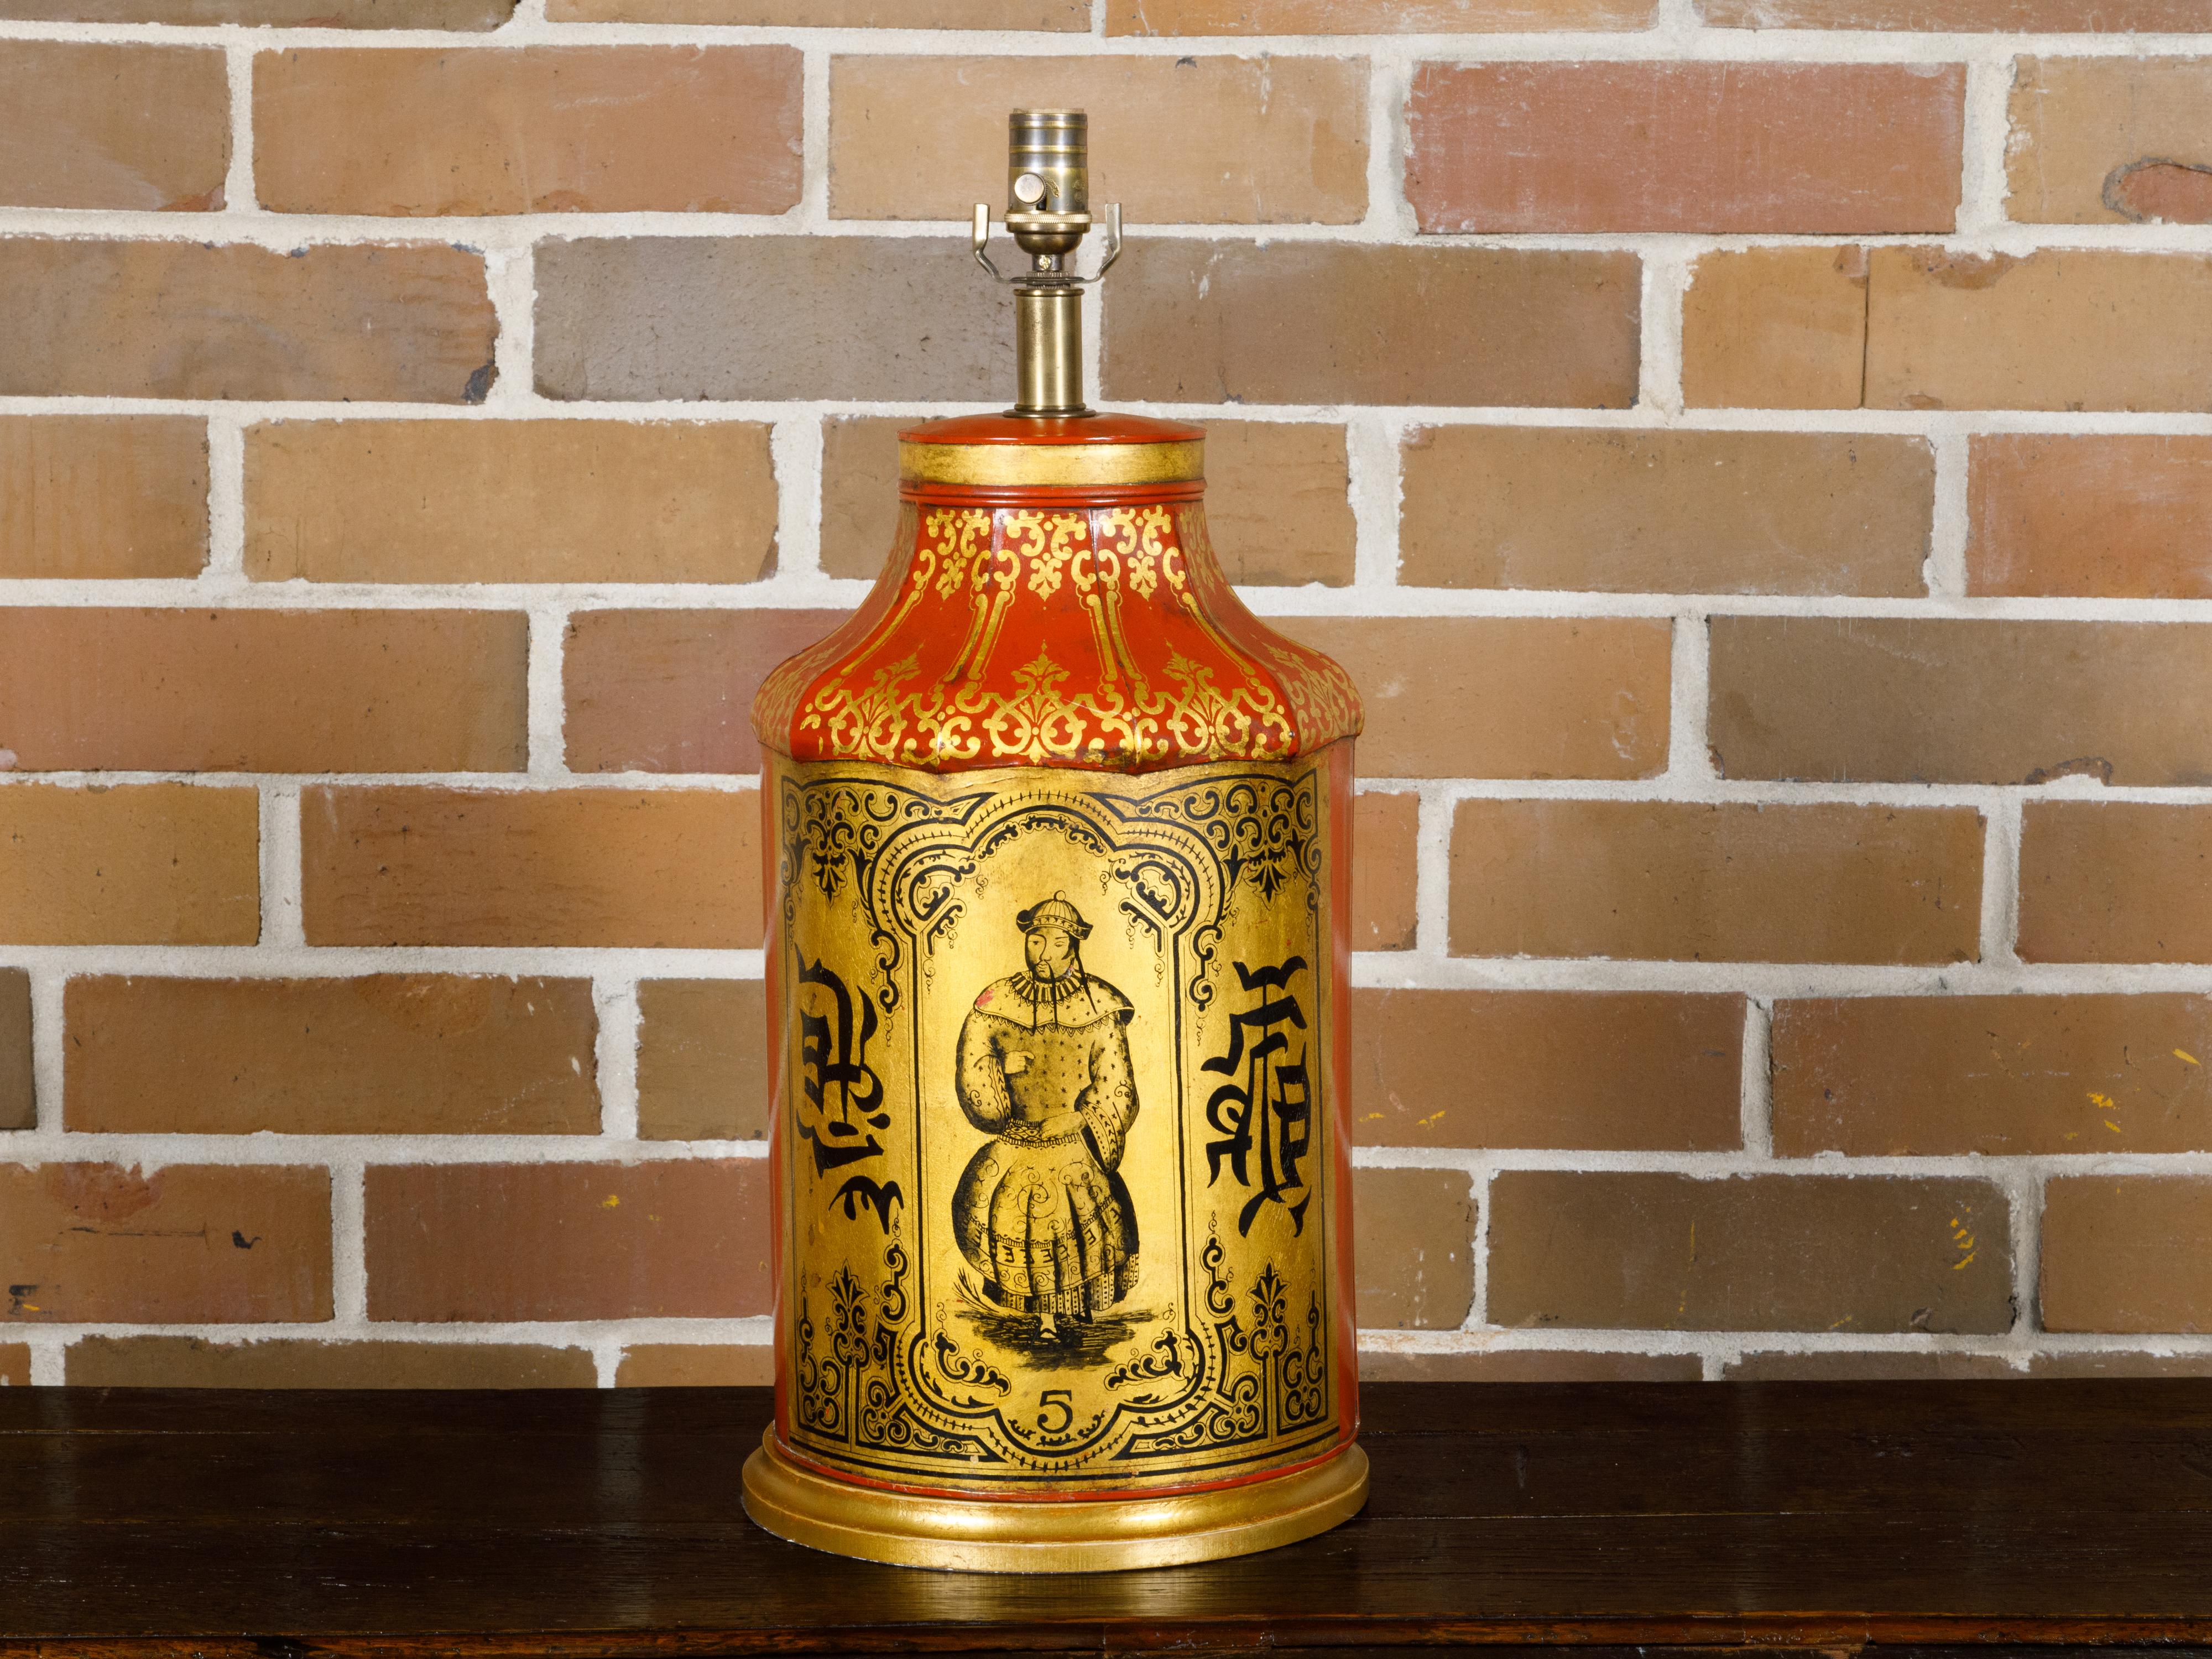 An English Chinoiserie tea tin red and gold canister from the 19th century made into a table lamp wired for the USA. This captivating English Chinoiserie tea tin canister from the 19th century, transformed into a table lamp, is a testament to the